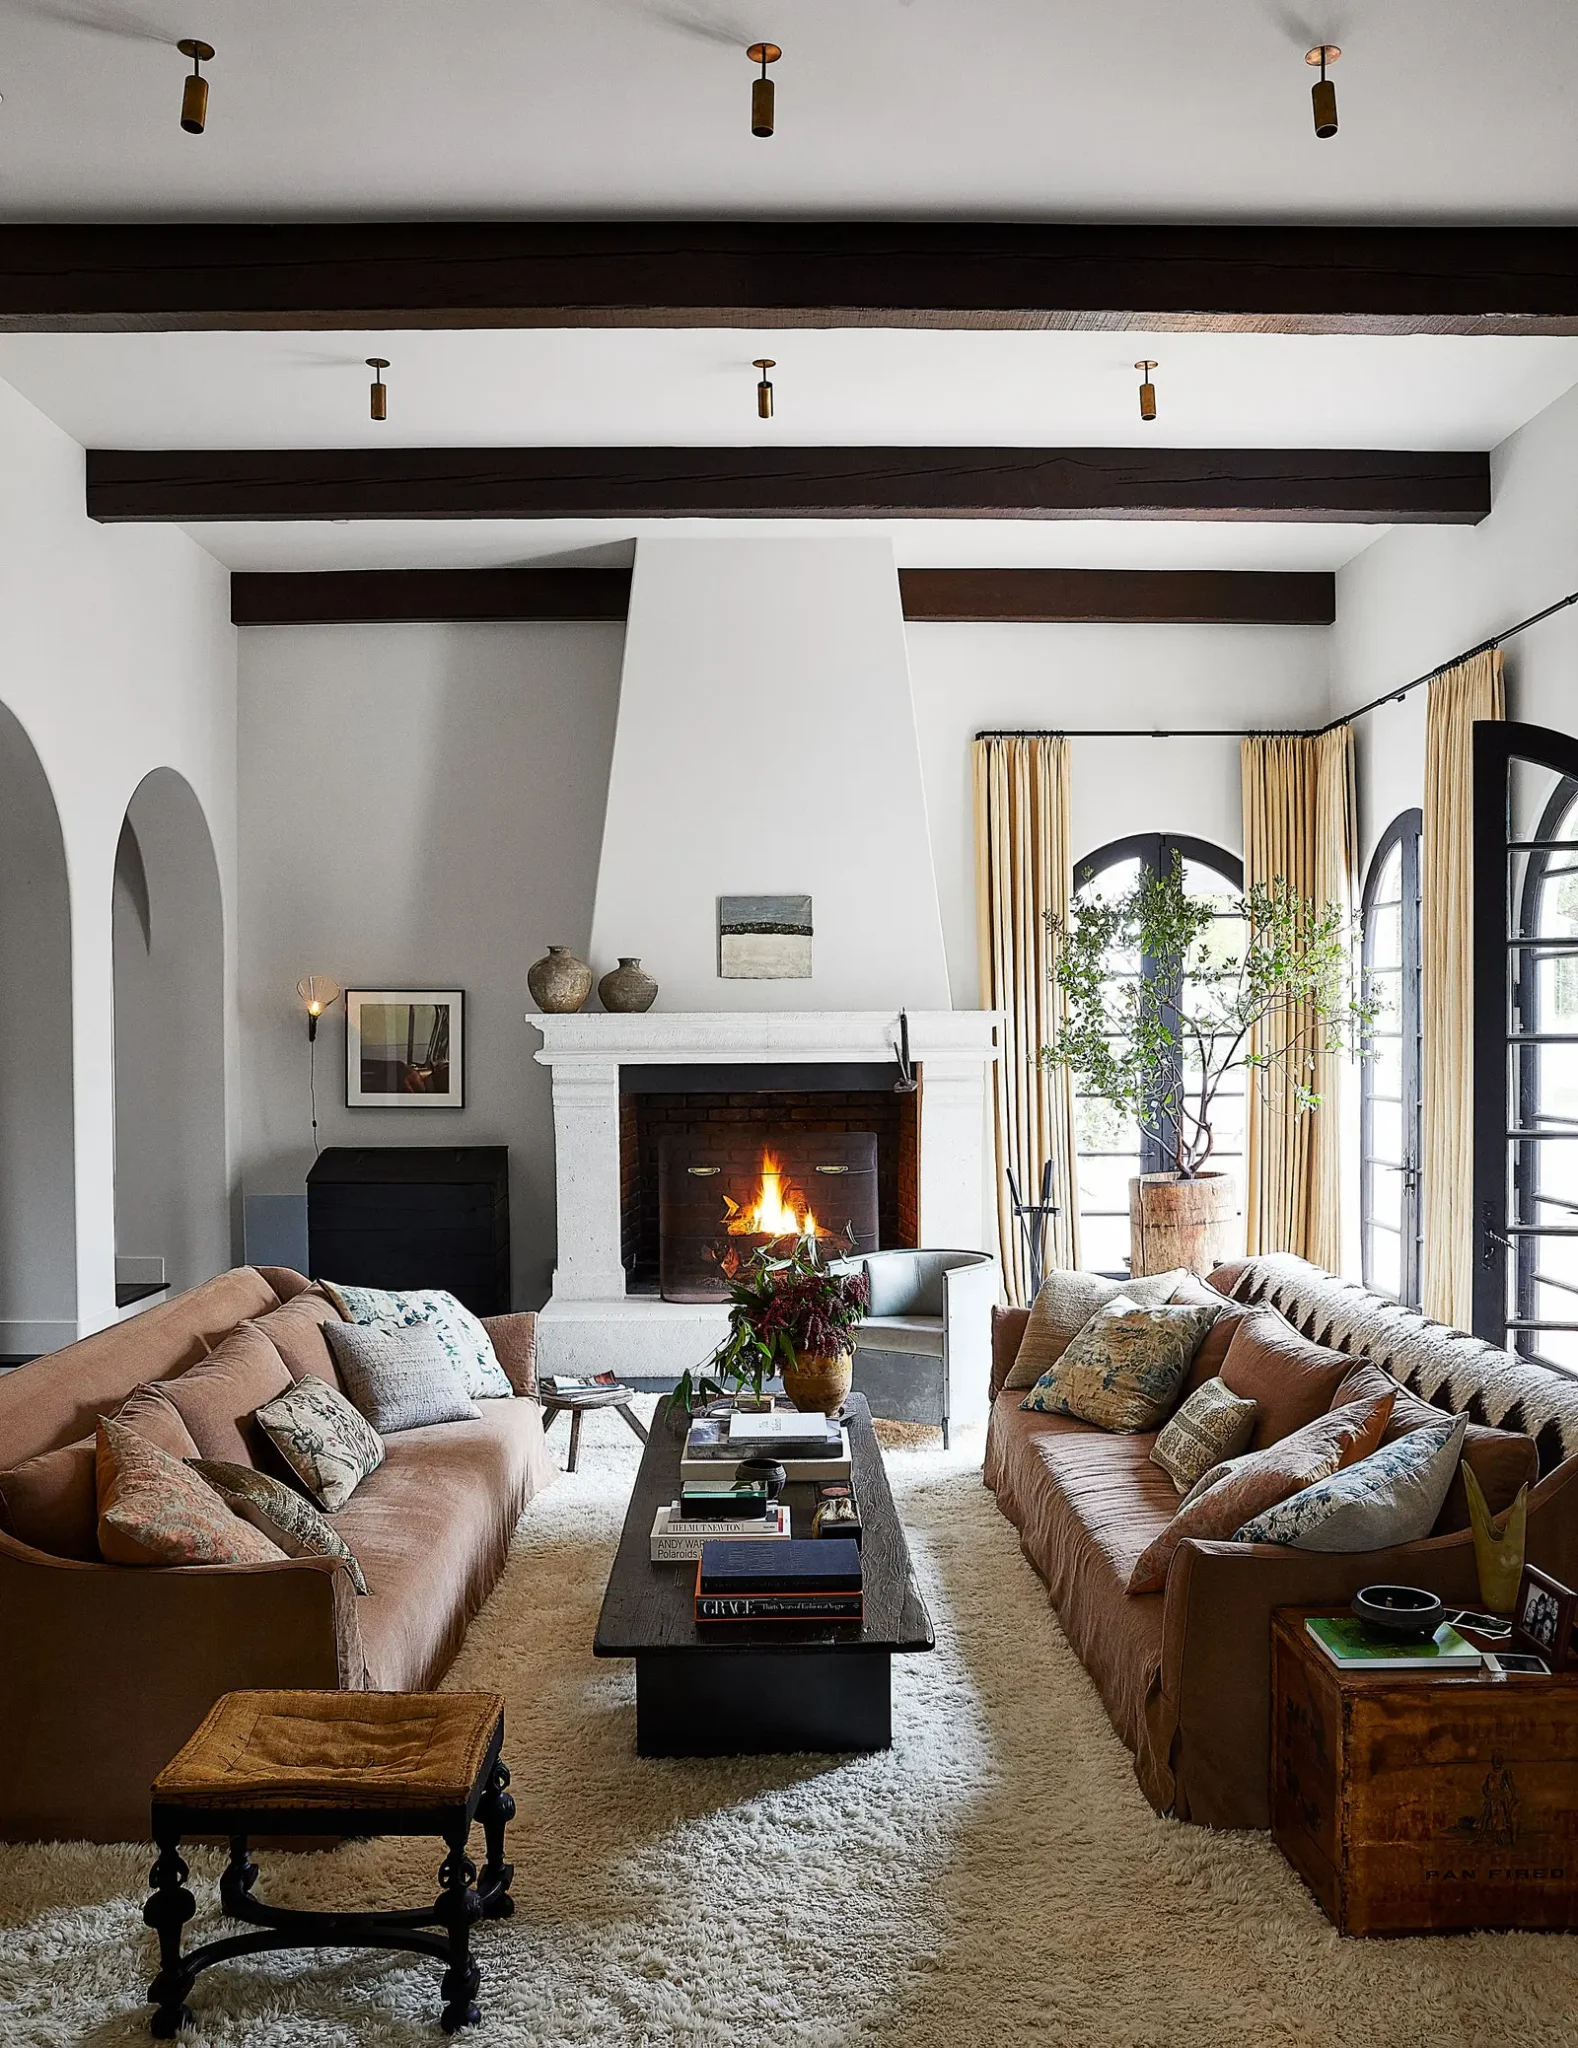 Kendall Living room with a fireplace and warm colors